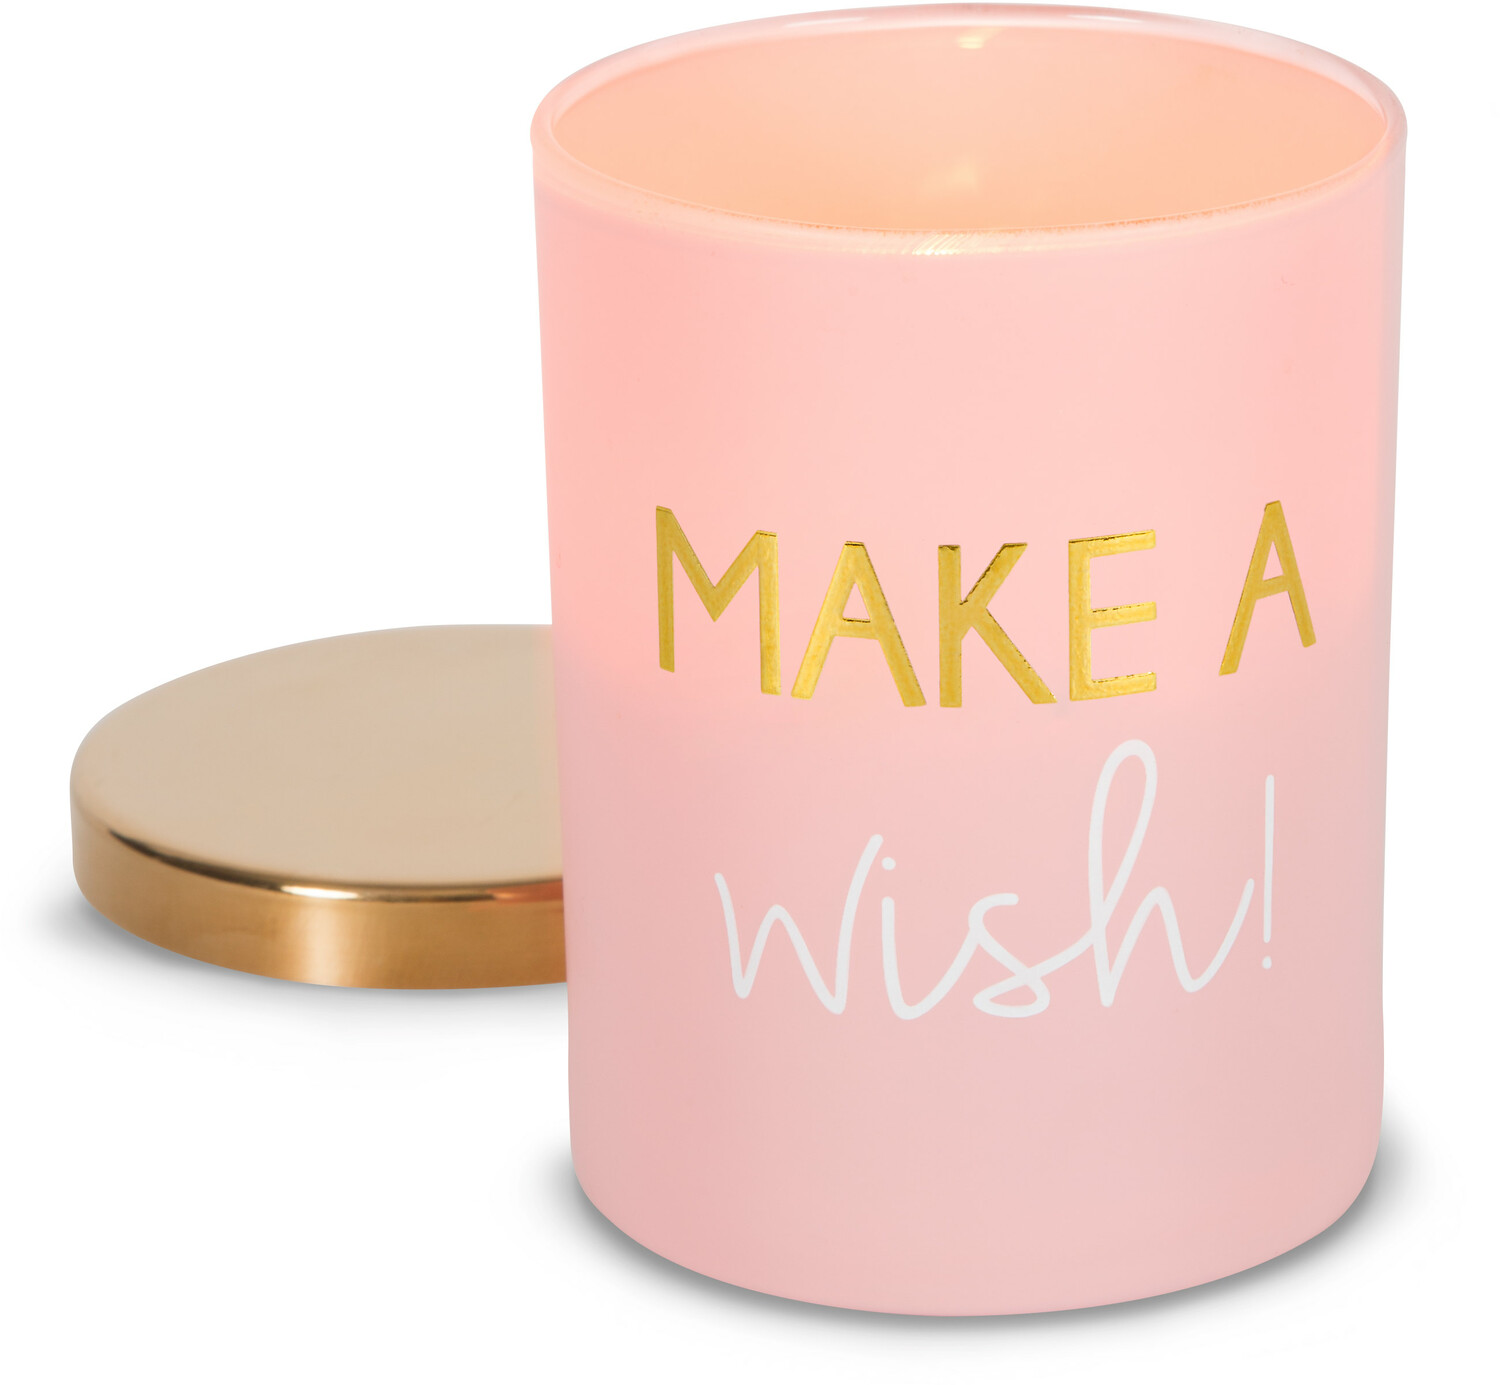 Wish by Happy Occasions - Wish - 7 oz 100% Soy Wax Candle Scent: Citron de Vigne